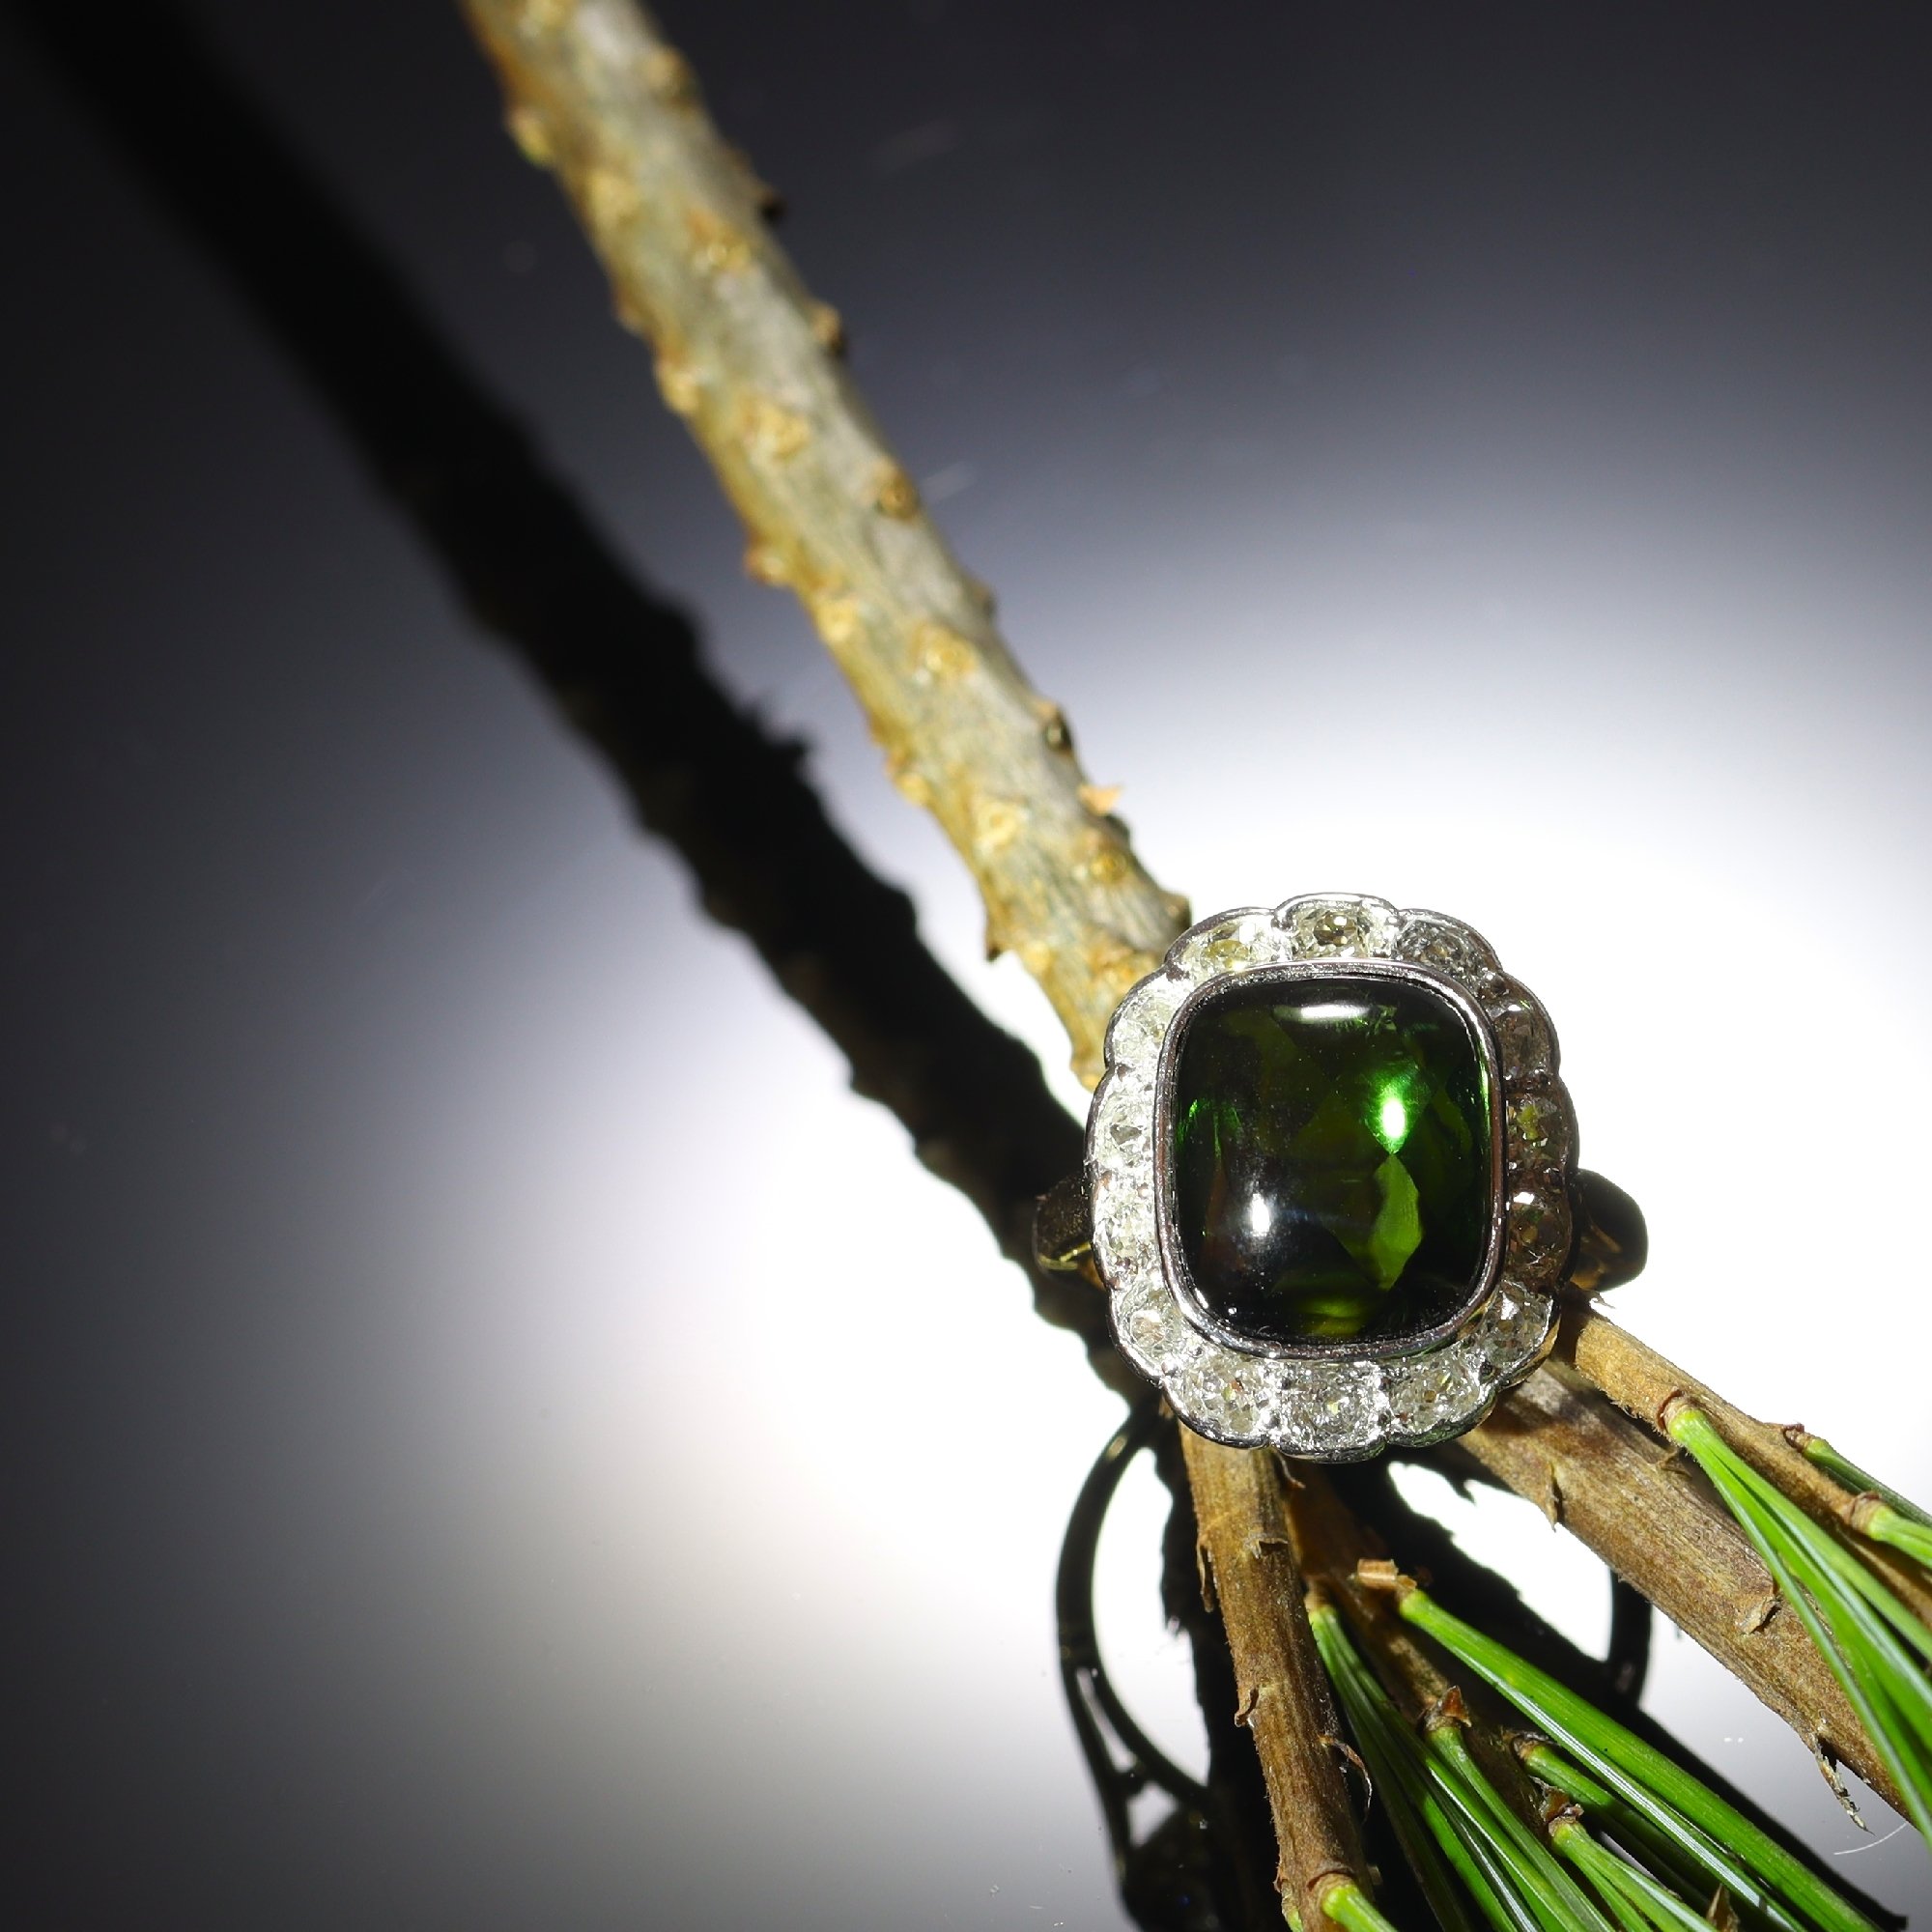 Click the picture to see more of this vintage diamond ring with large verdelite (green tourmaline)